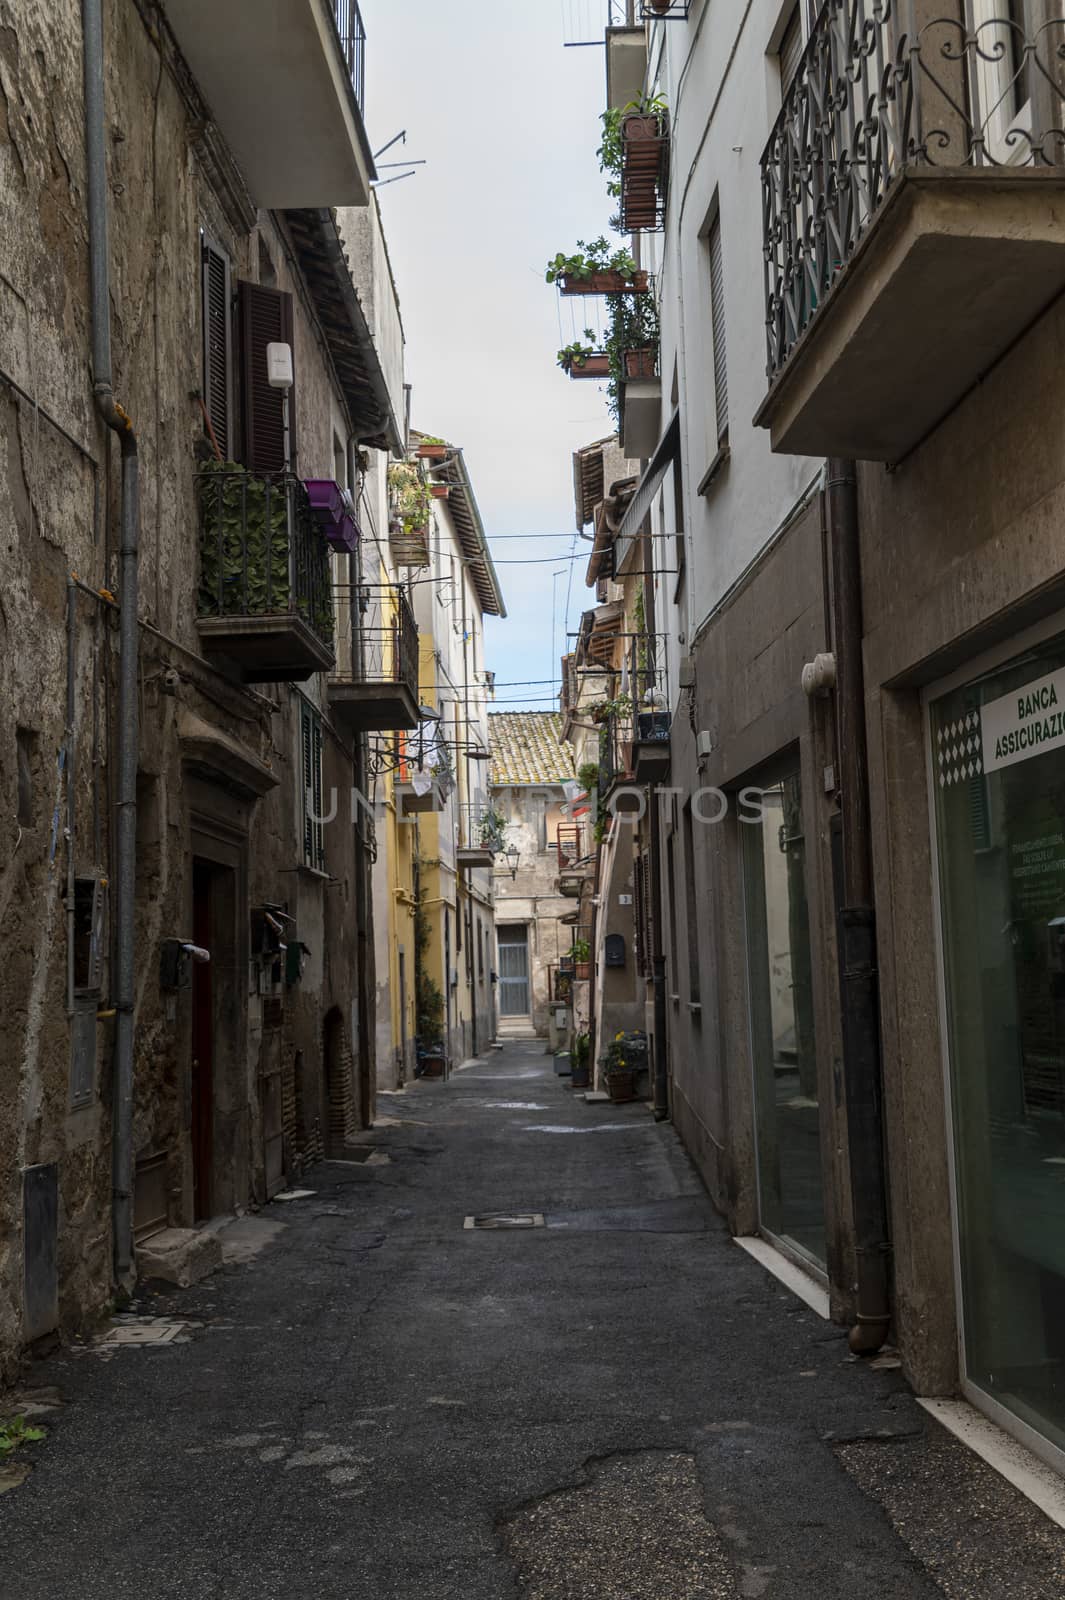 nepi,italy september 26 2020:architecture of alleys and buildings in the town of Nepi